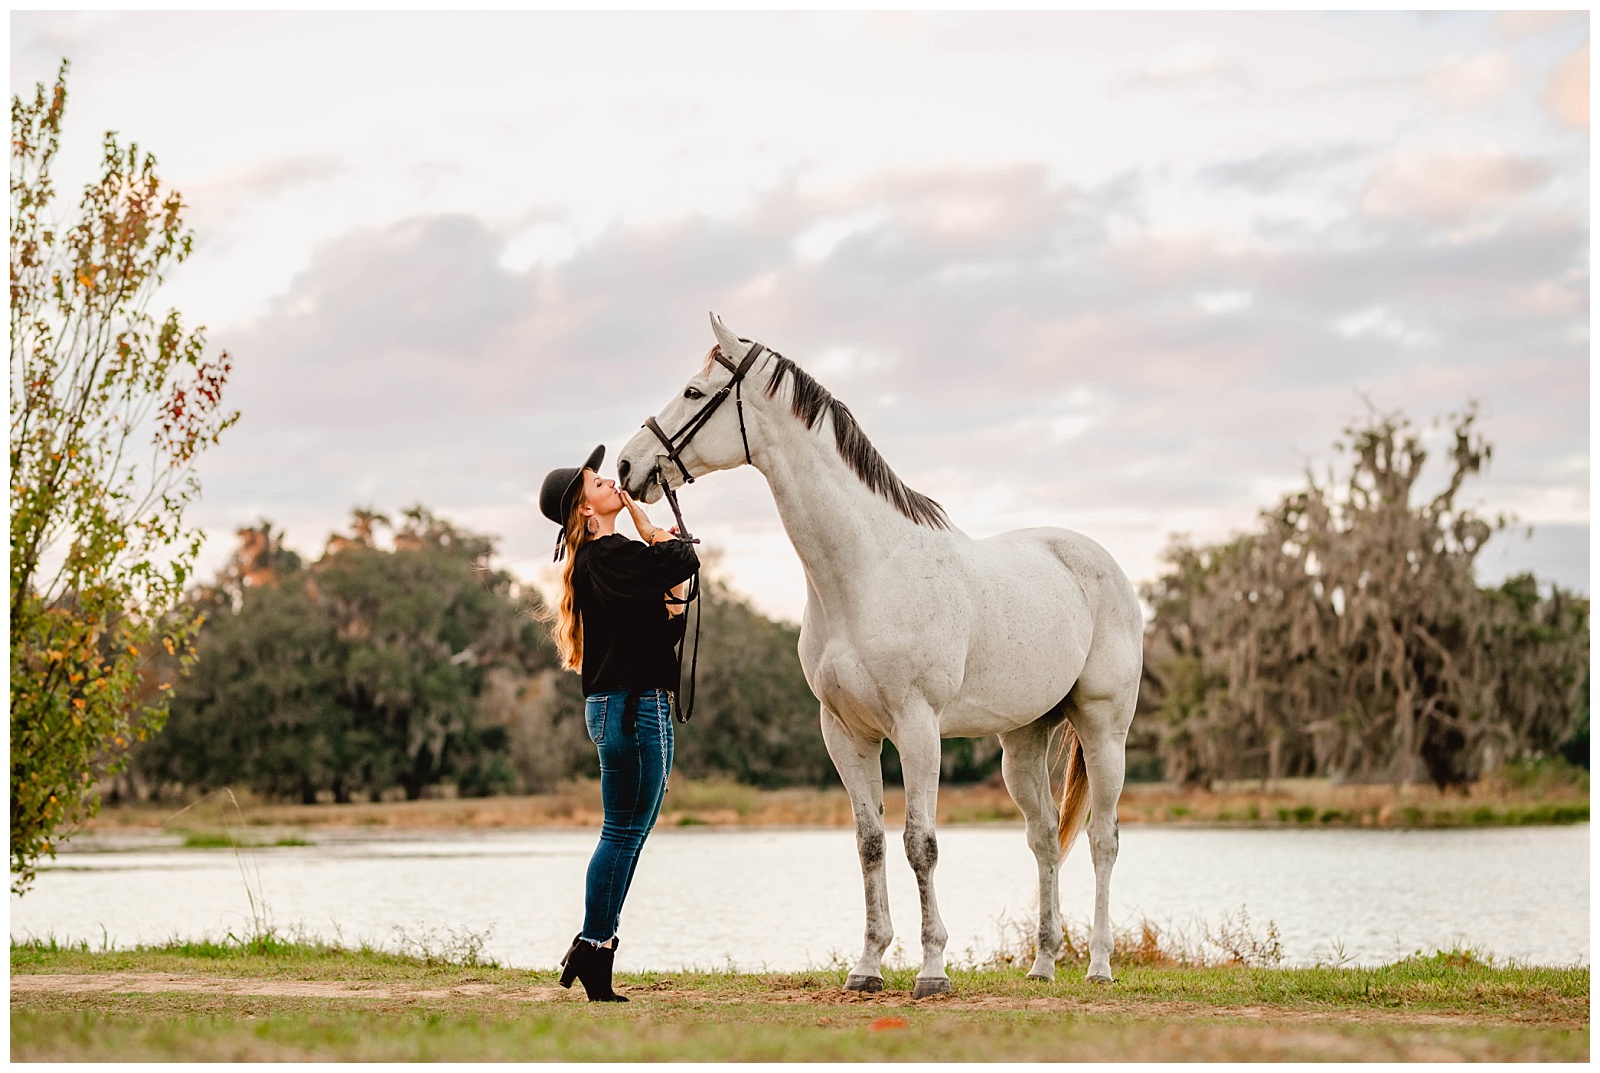 Horse and rider photoshoot in Gainesville, Fl at sunset taken by professional equine photographer.